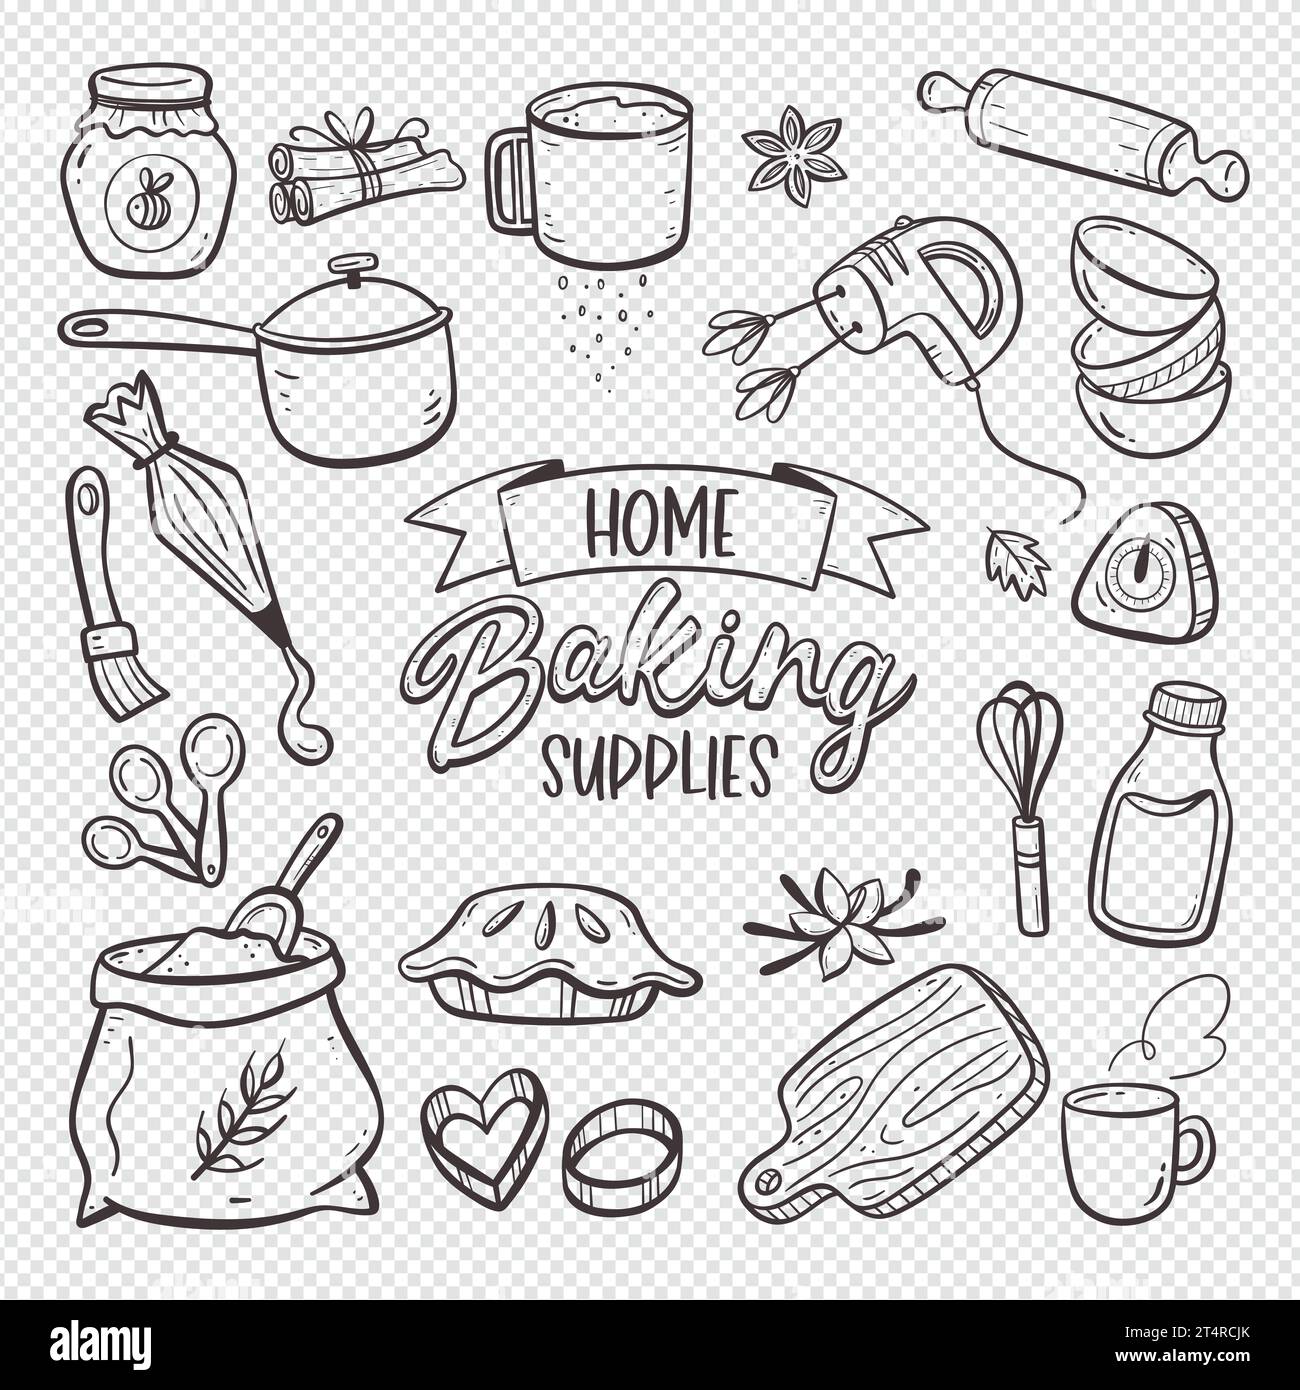 Baking products isolated on white background. Hand-drawn doodle illustration. Home baking supplies. Vector illustration. Set 1 of 2. Stock Vector